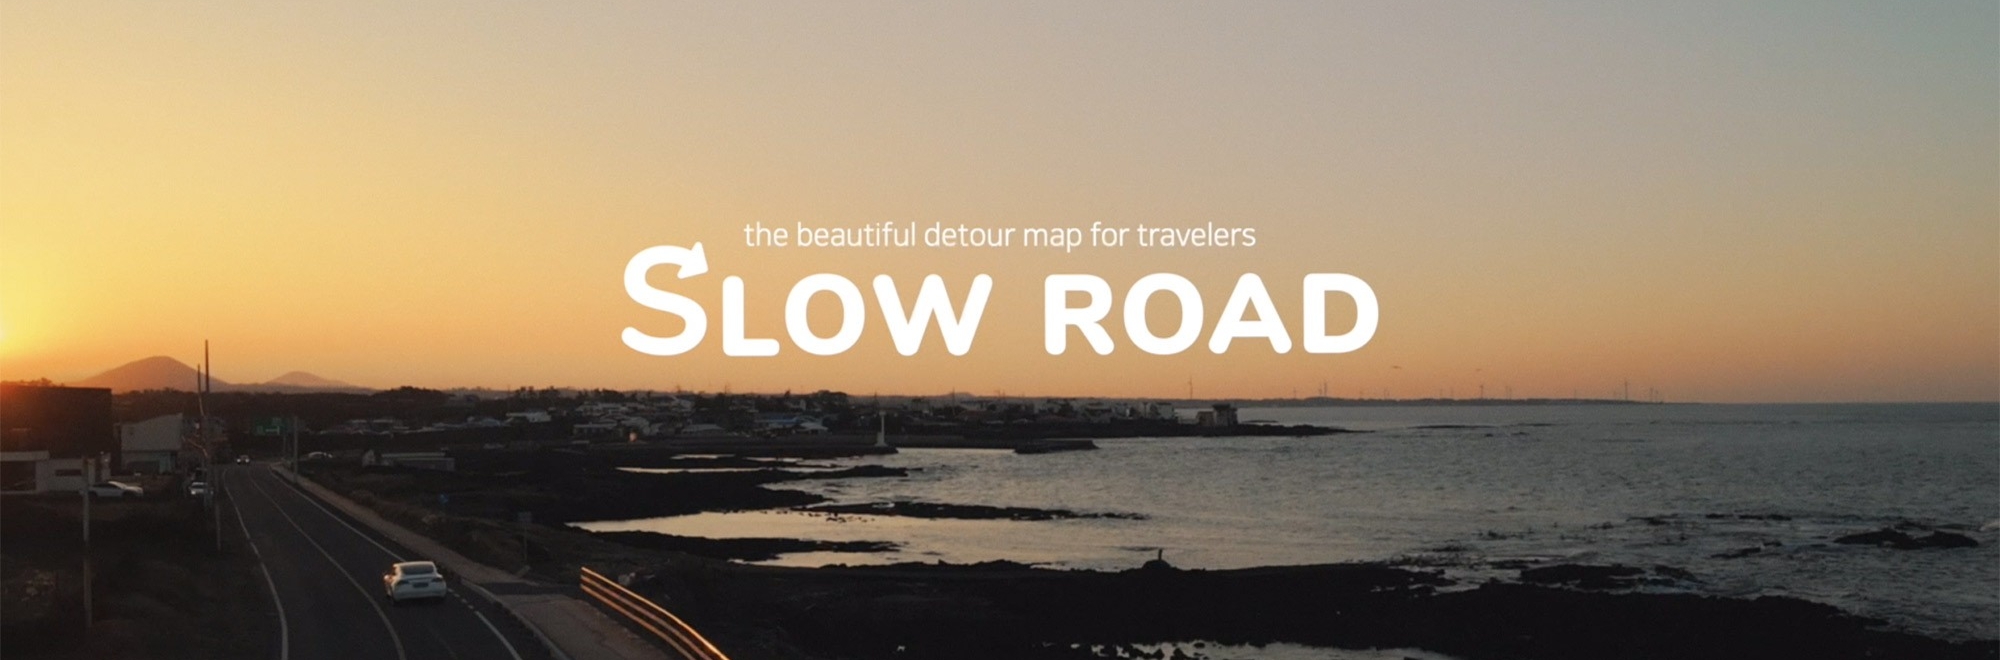 Cheil Worldwide launches 'Slow Road' offering the most beautiful route, not the fastest